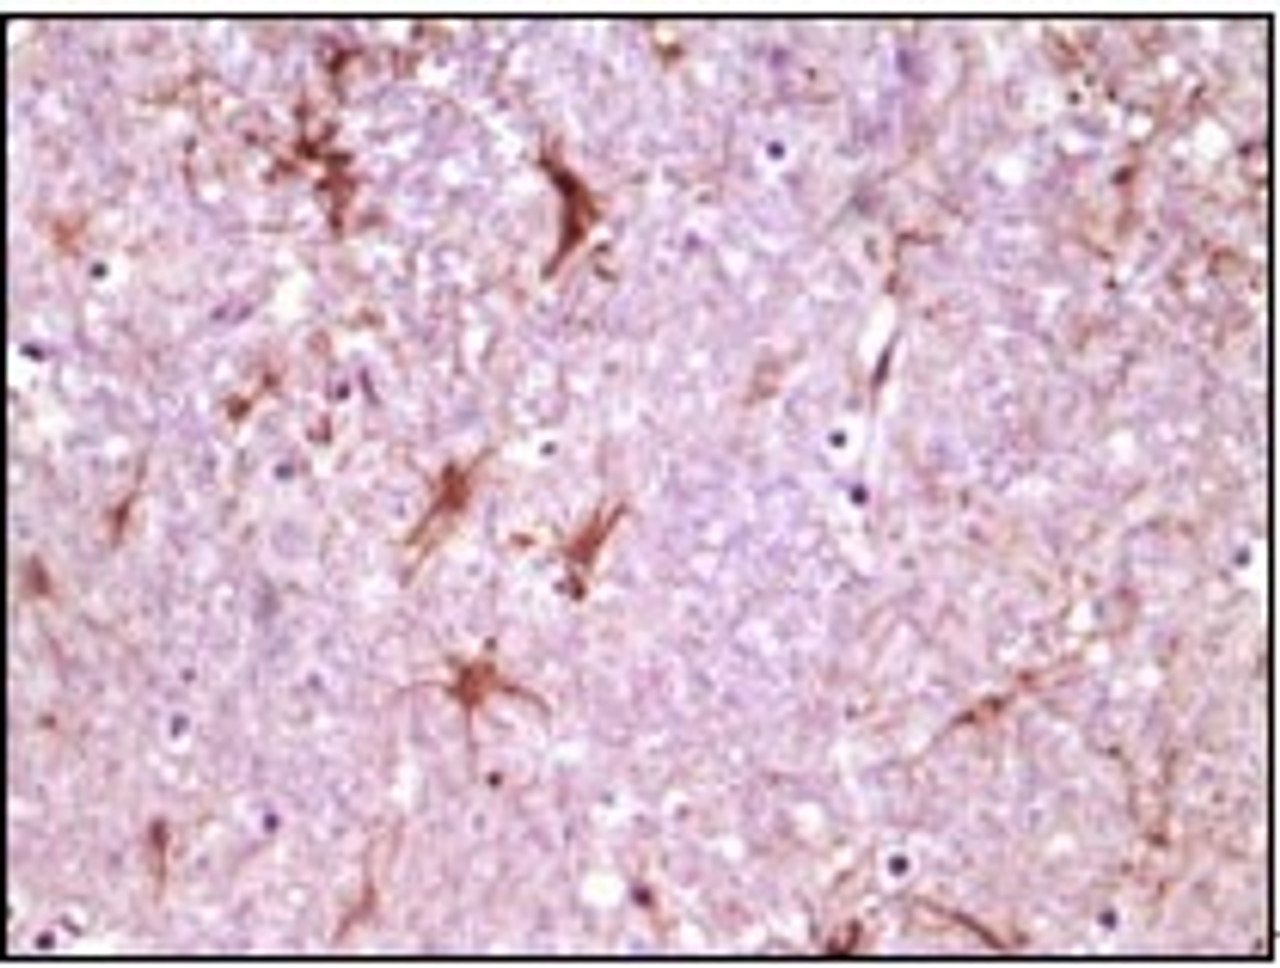 Immunohistochemical analysis of paraffin - embedded human glioma tissue showing membrane location using CIB1 antibody with DAB staining.